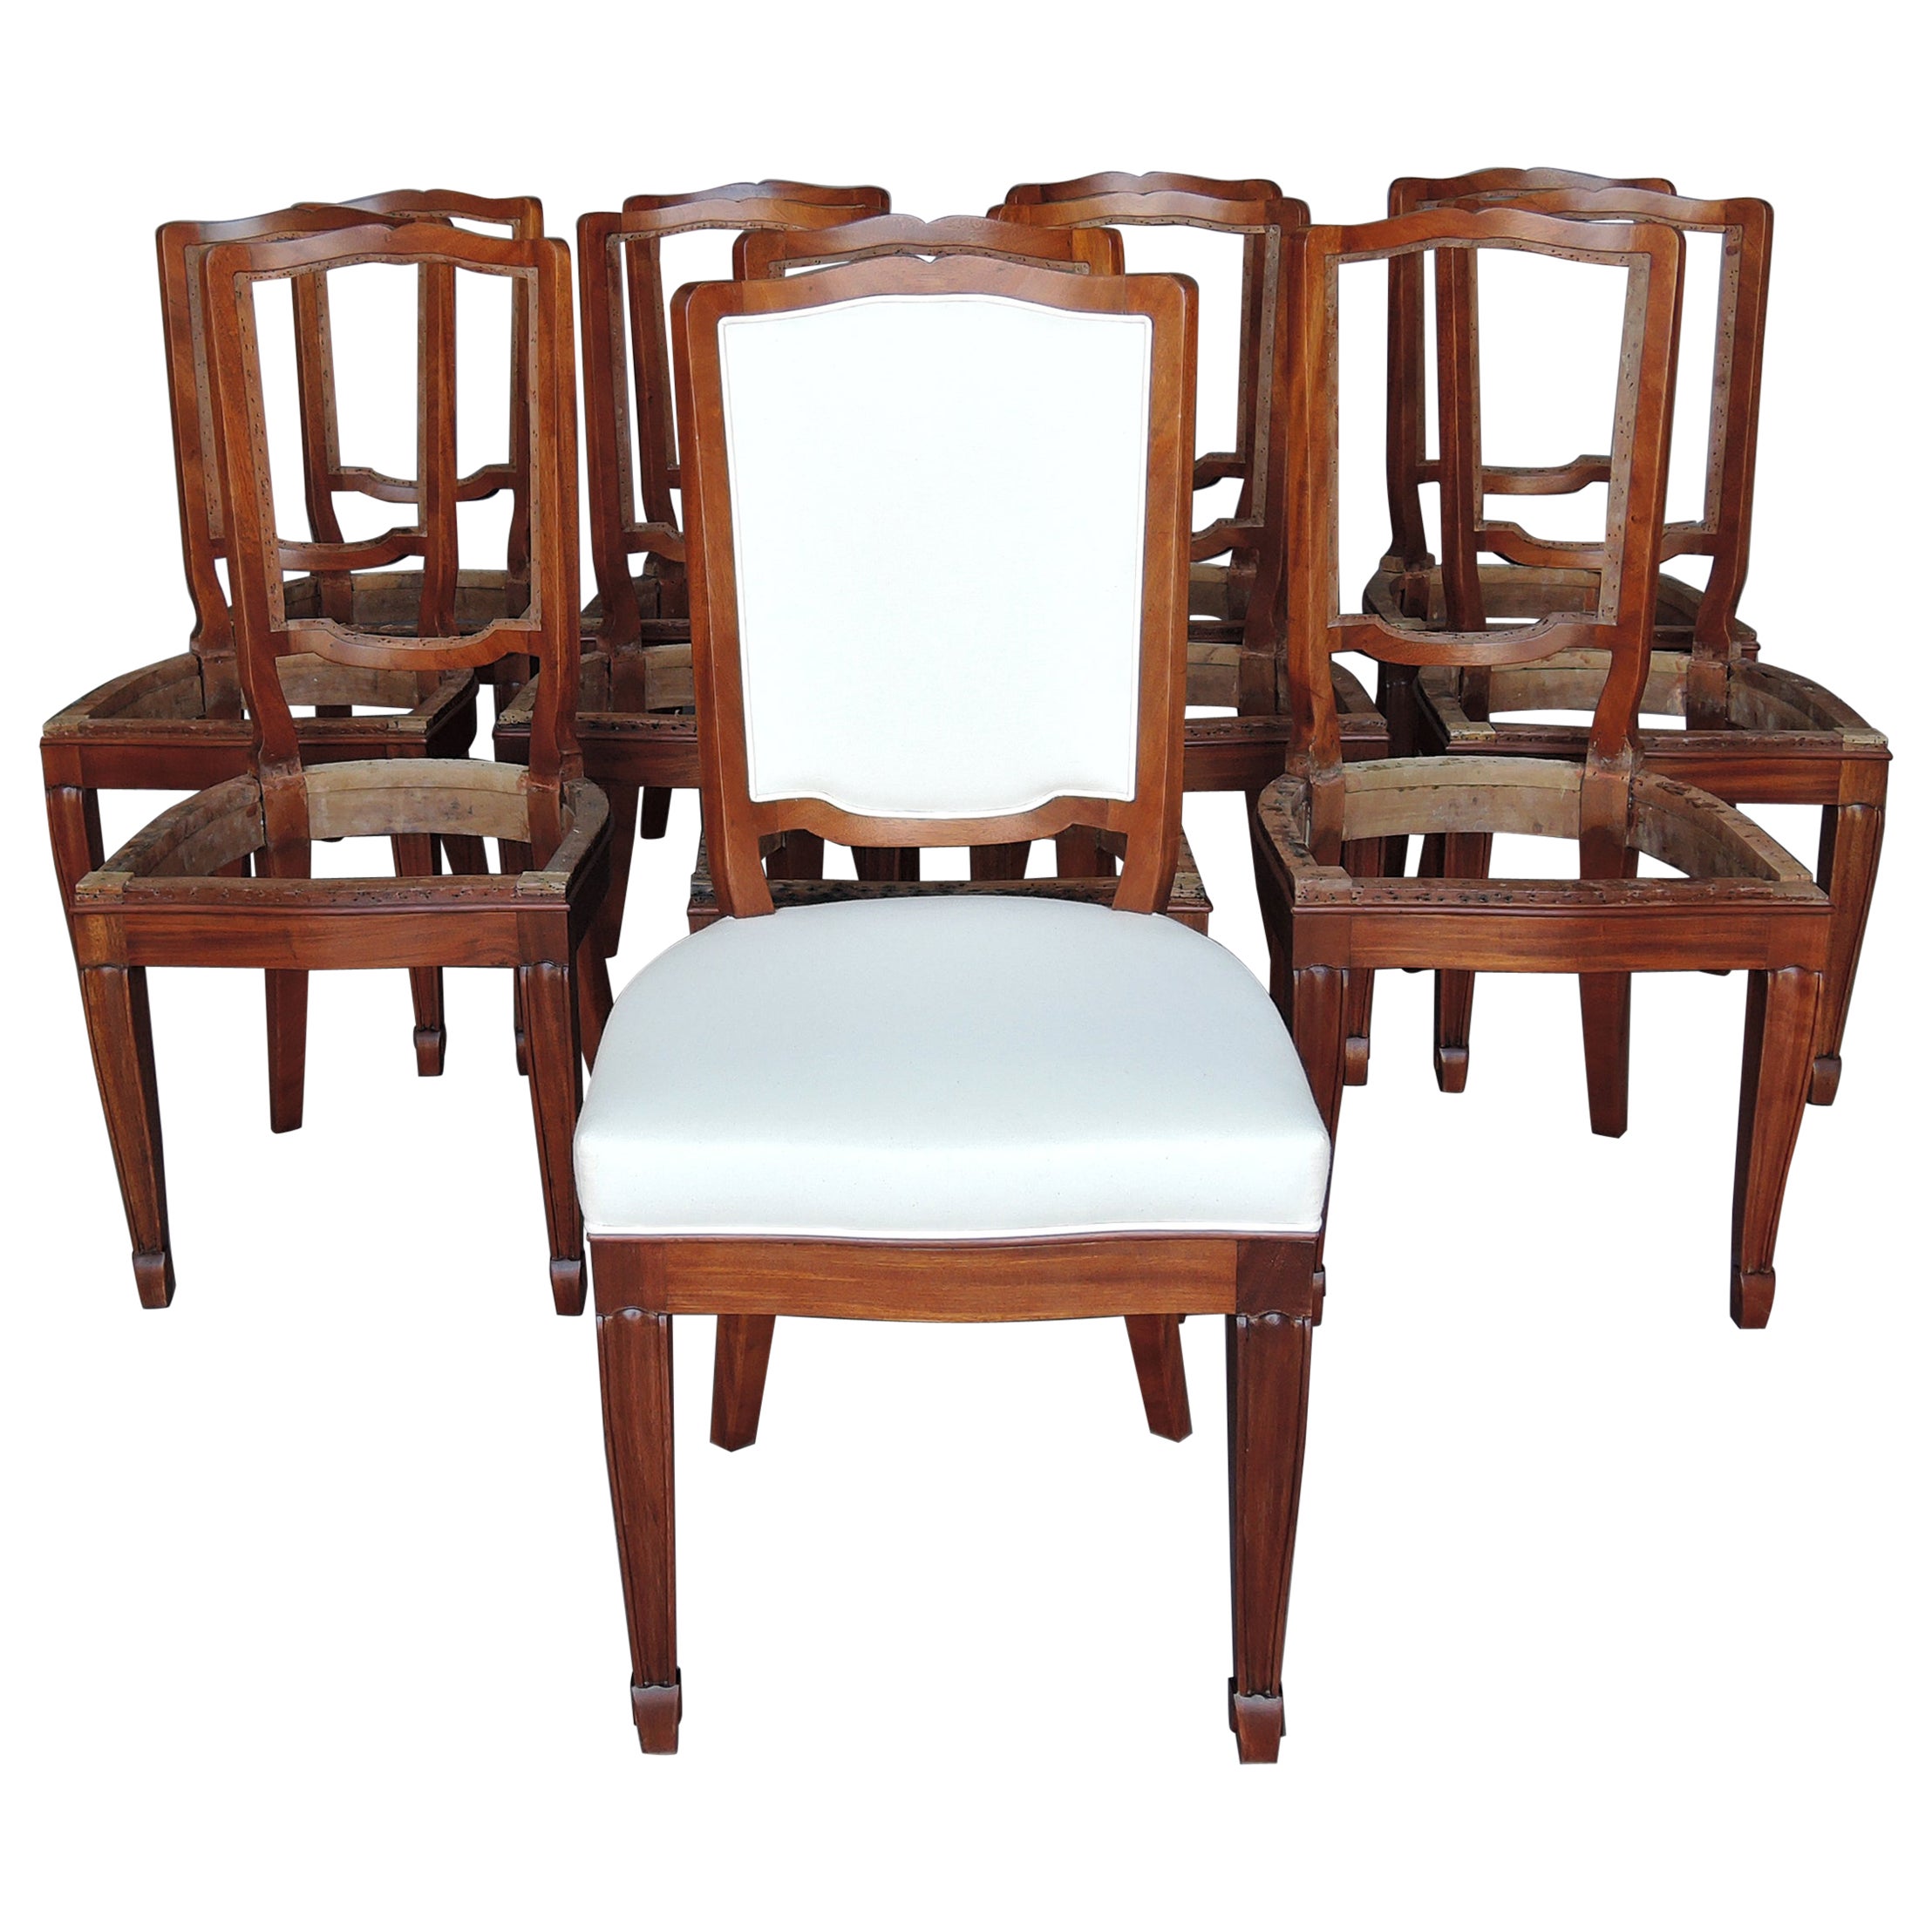 A Set of 12 Fine French Art Deco Mahogany Dining Chairs in the Manner of Arbus For Sale